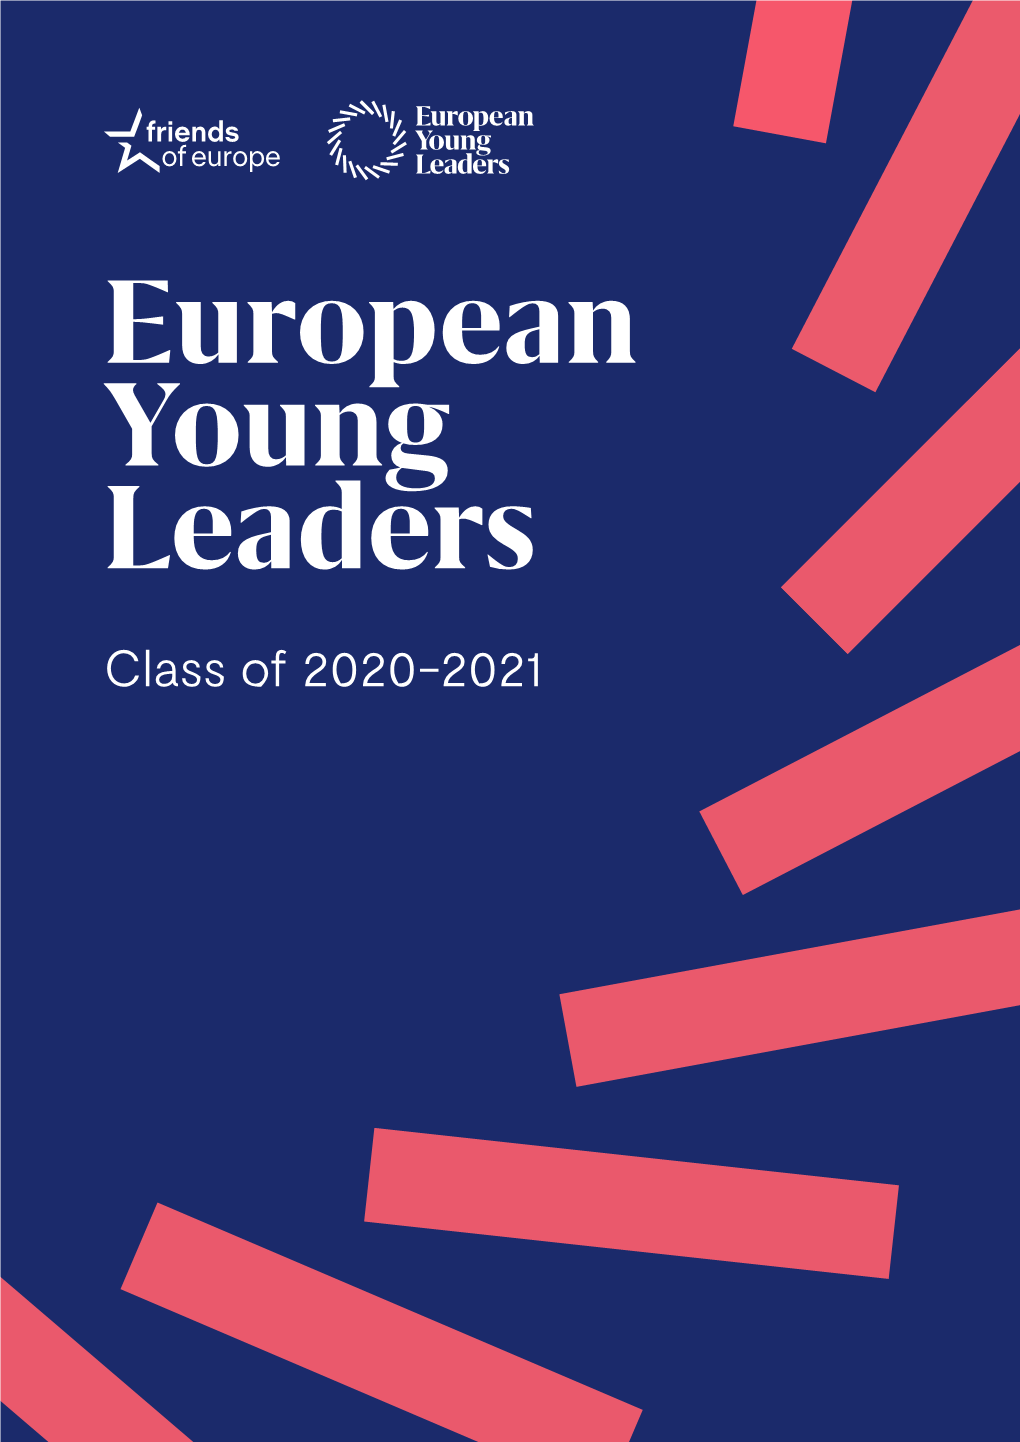 Class of 2020-2021 About the EYL40 Programme